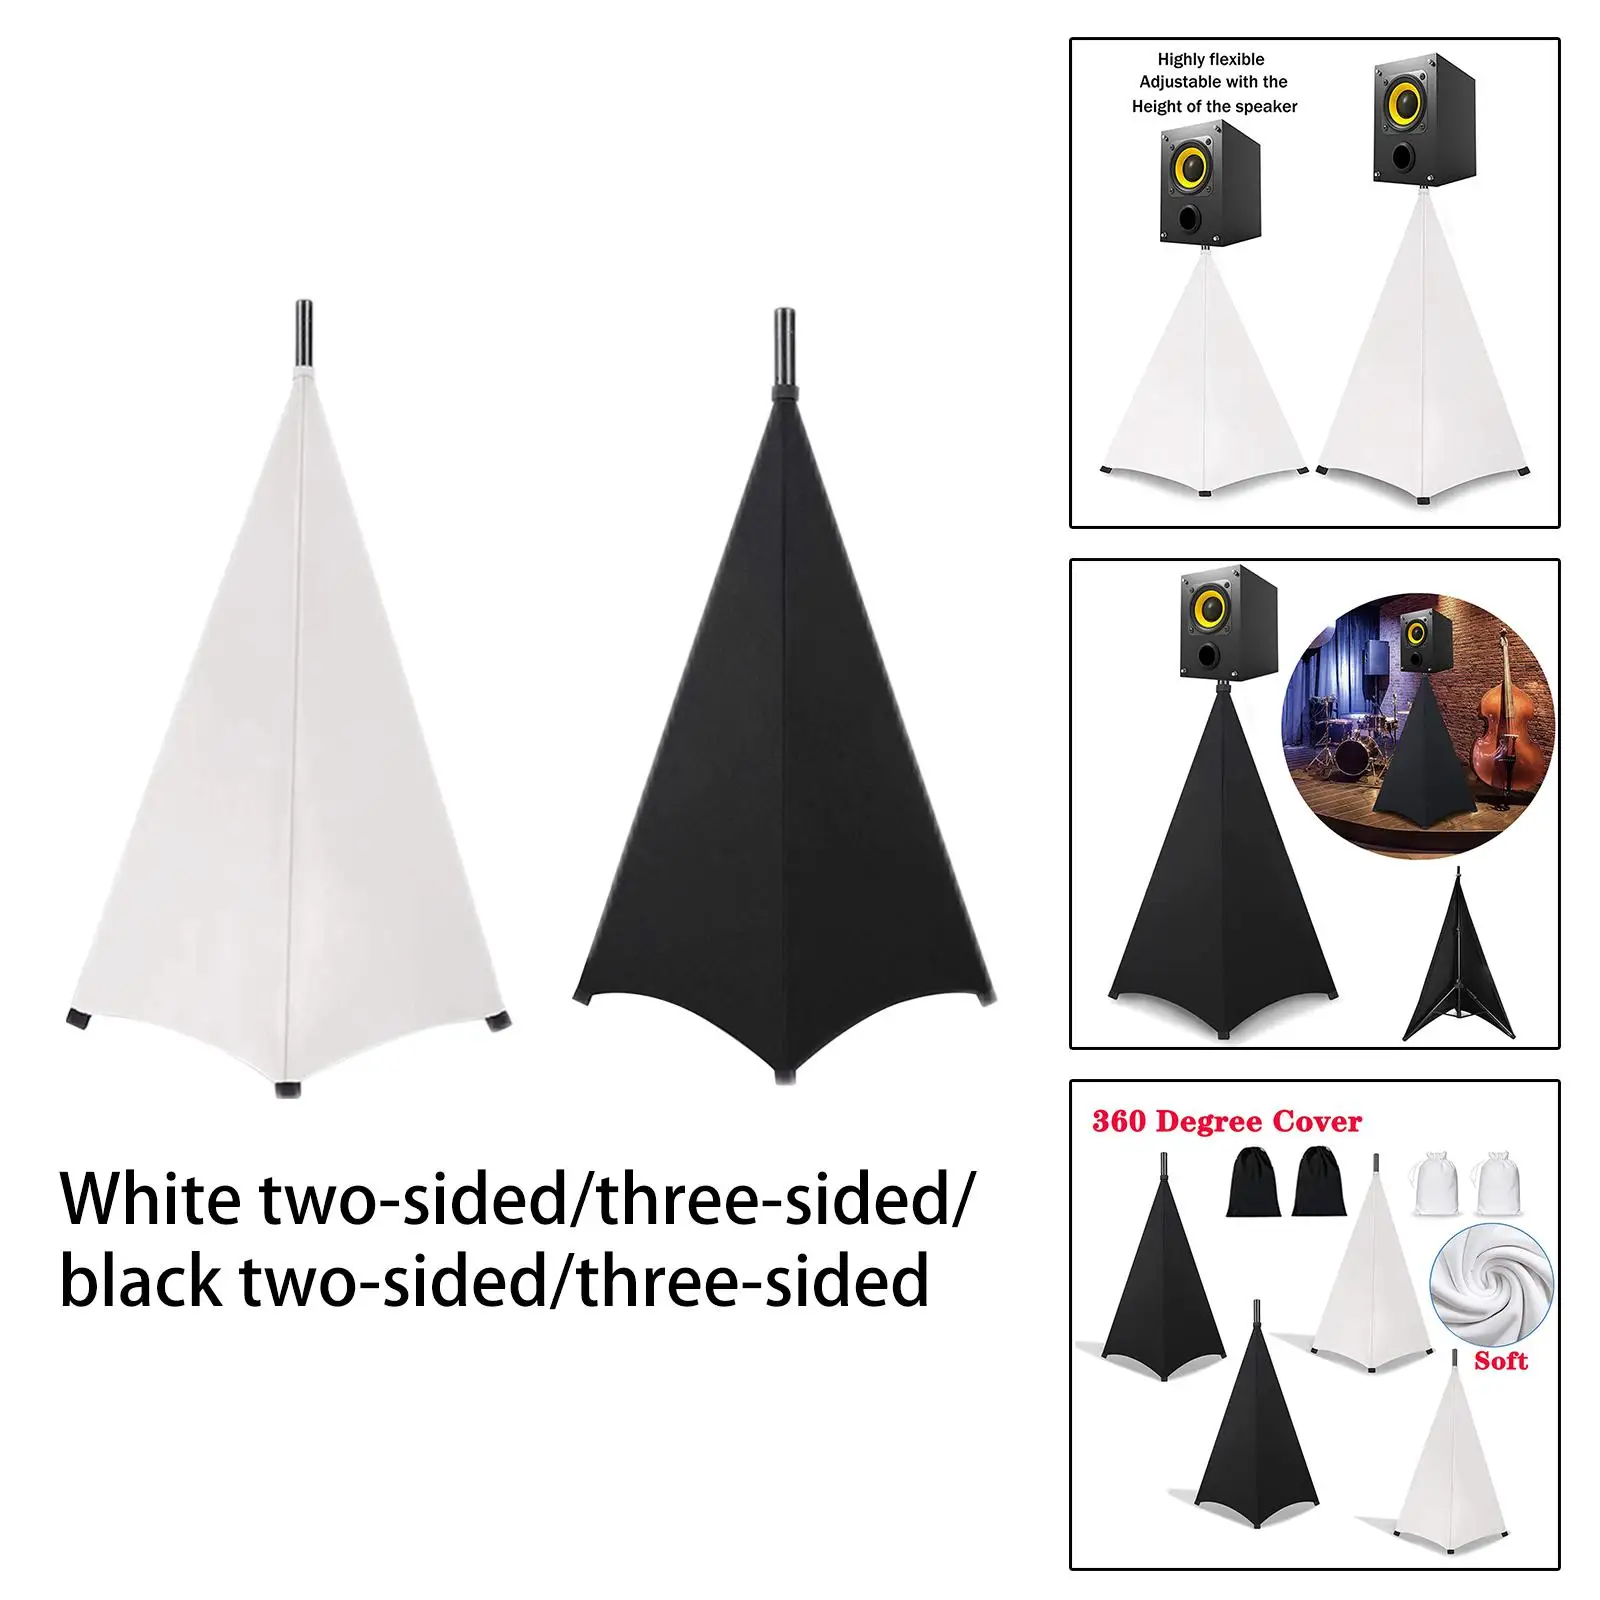 UCARE 2pcs Floor Speaker Stand Covers Metal Heavy Duty Support Stand Cover for Weddings Banquets Events 3 Sided Triangular DJ Speaker Stand Tripod Cover Scrim Two Pack-Black 